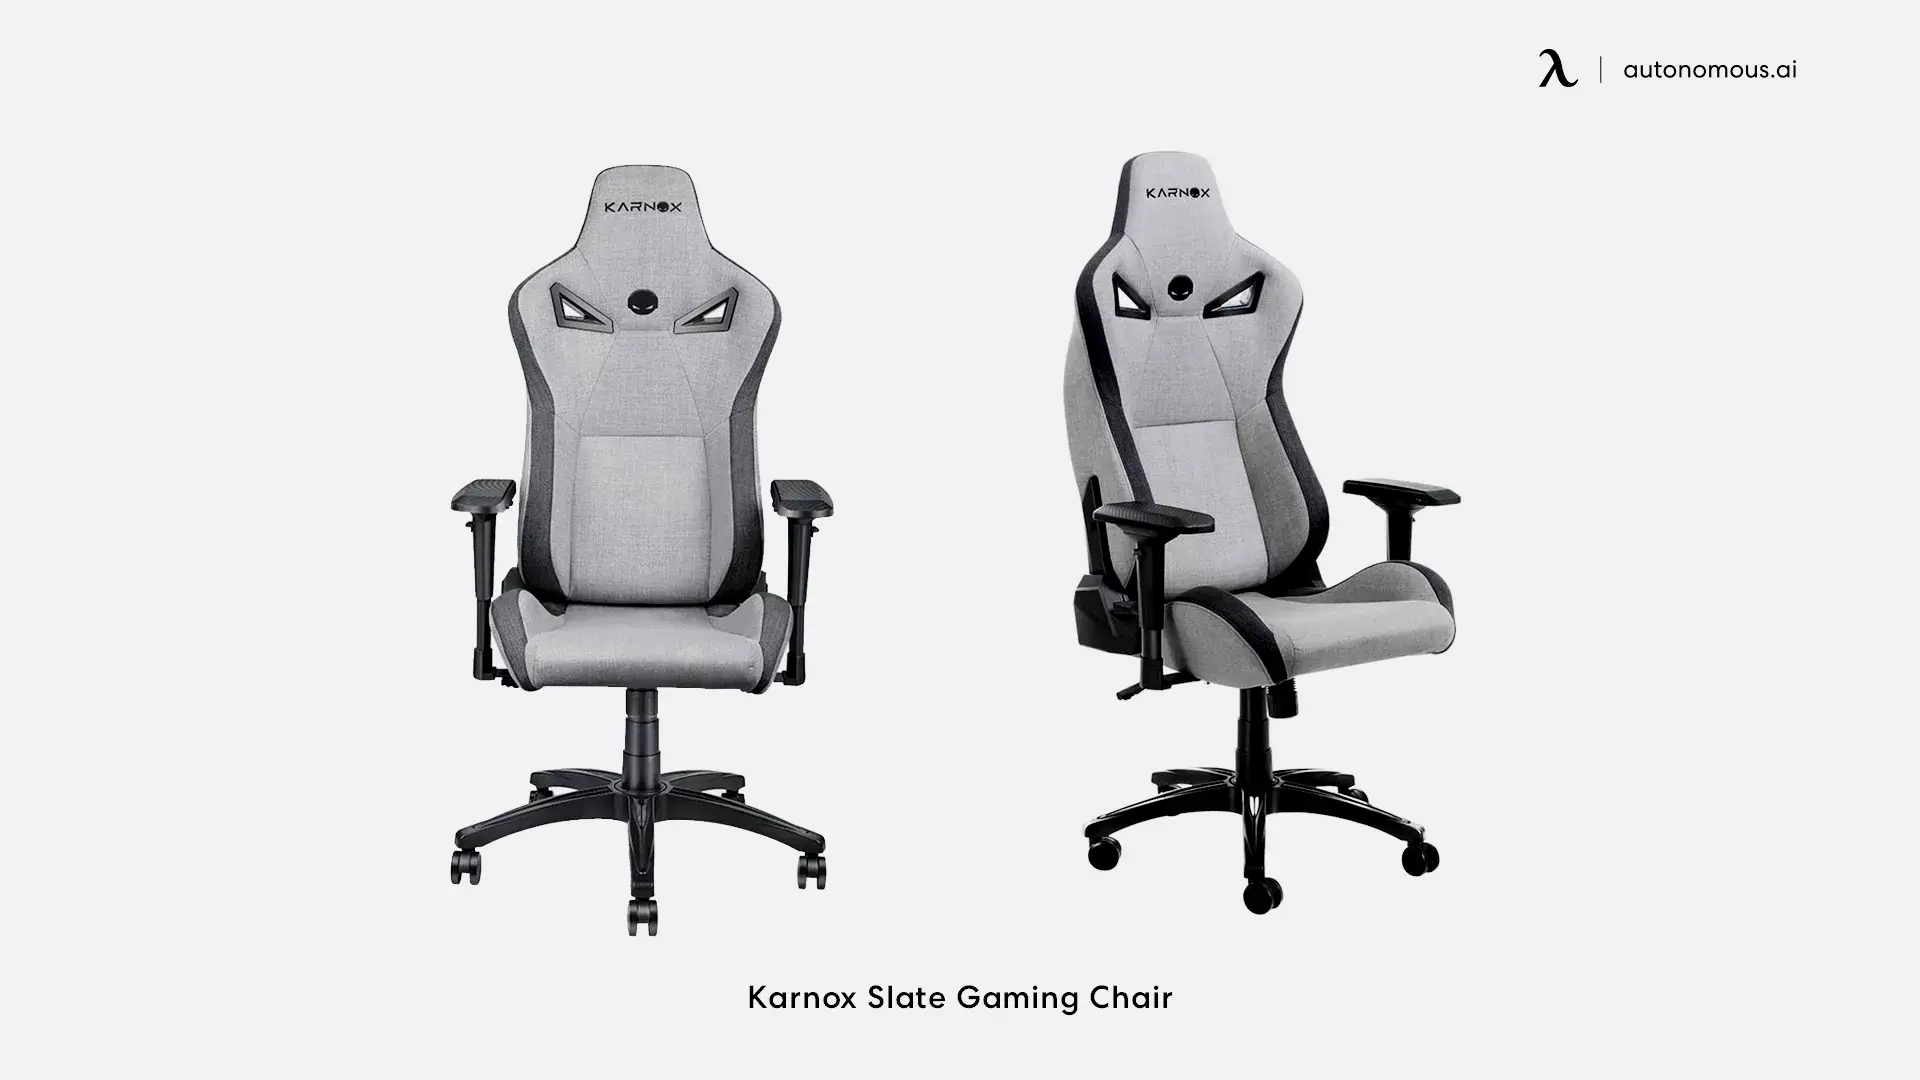 Gaming Chair by Karnox in gaming office setup